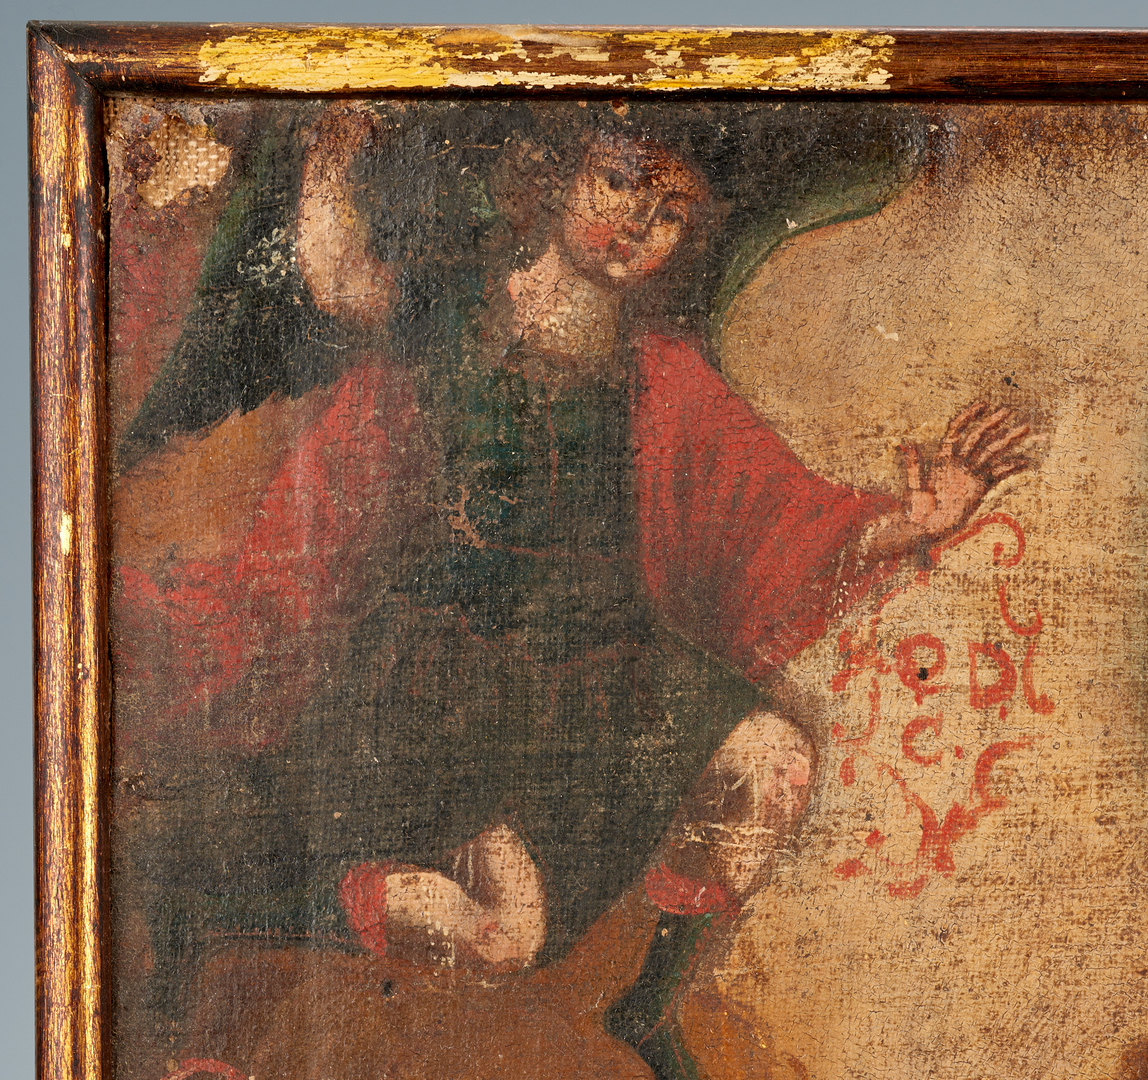 Lot 83: Cuzco School Painting, Madonna and Child